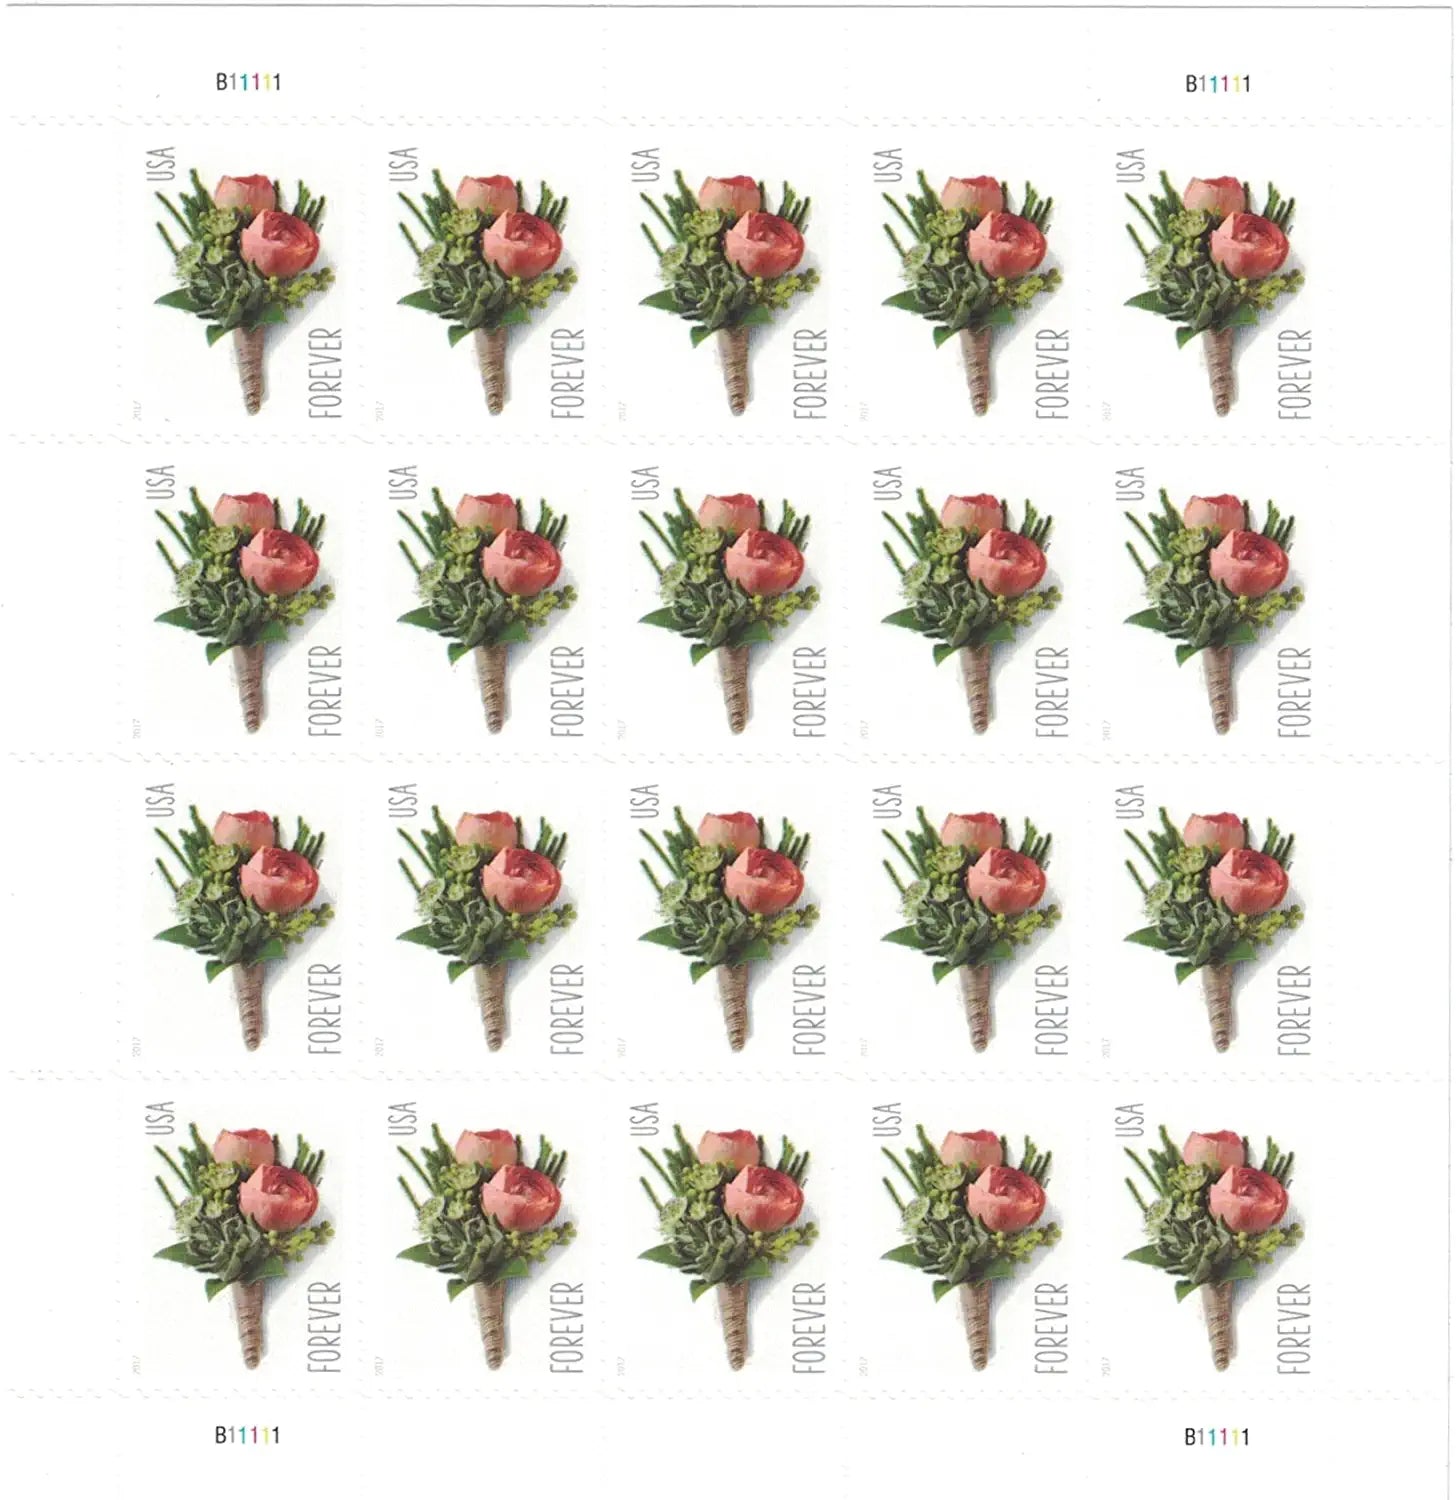 USPS Celebration Boutonniere 2017 Forever Stamps - Booklet of 20 Postage Stamps